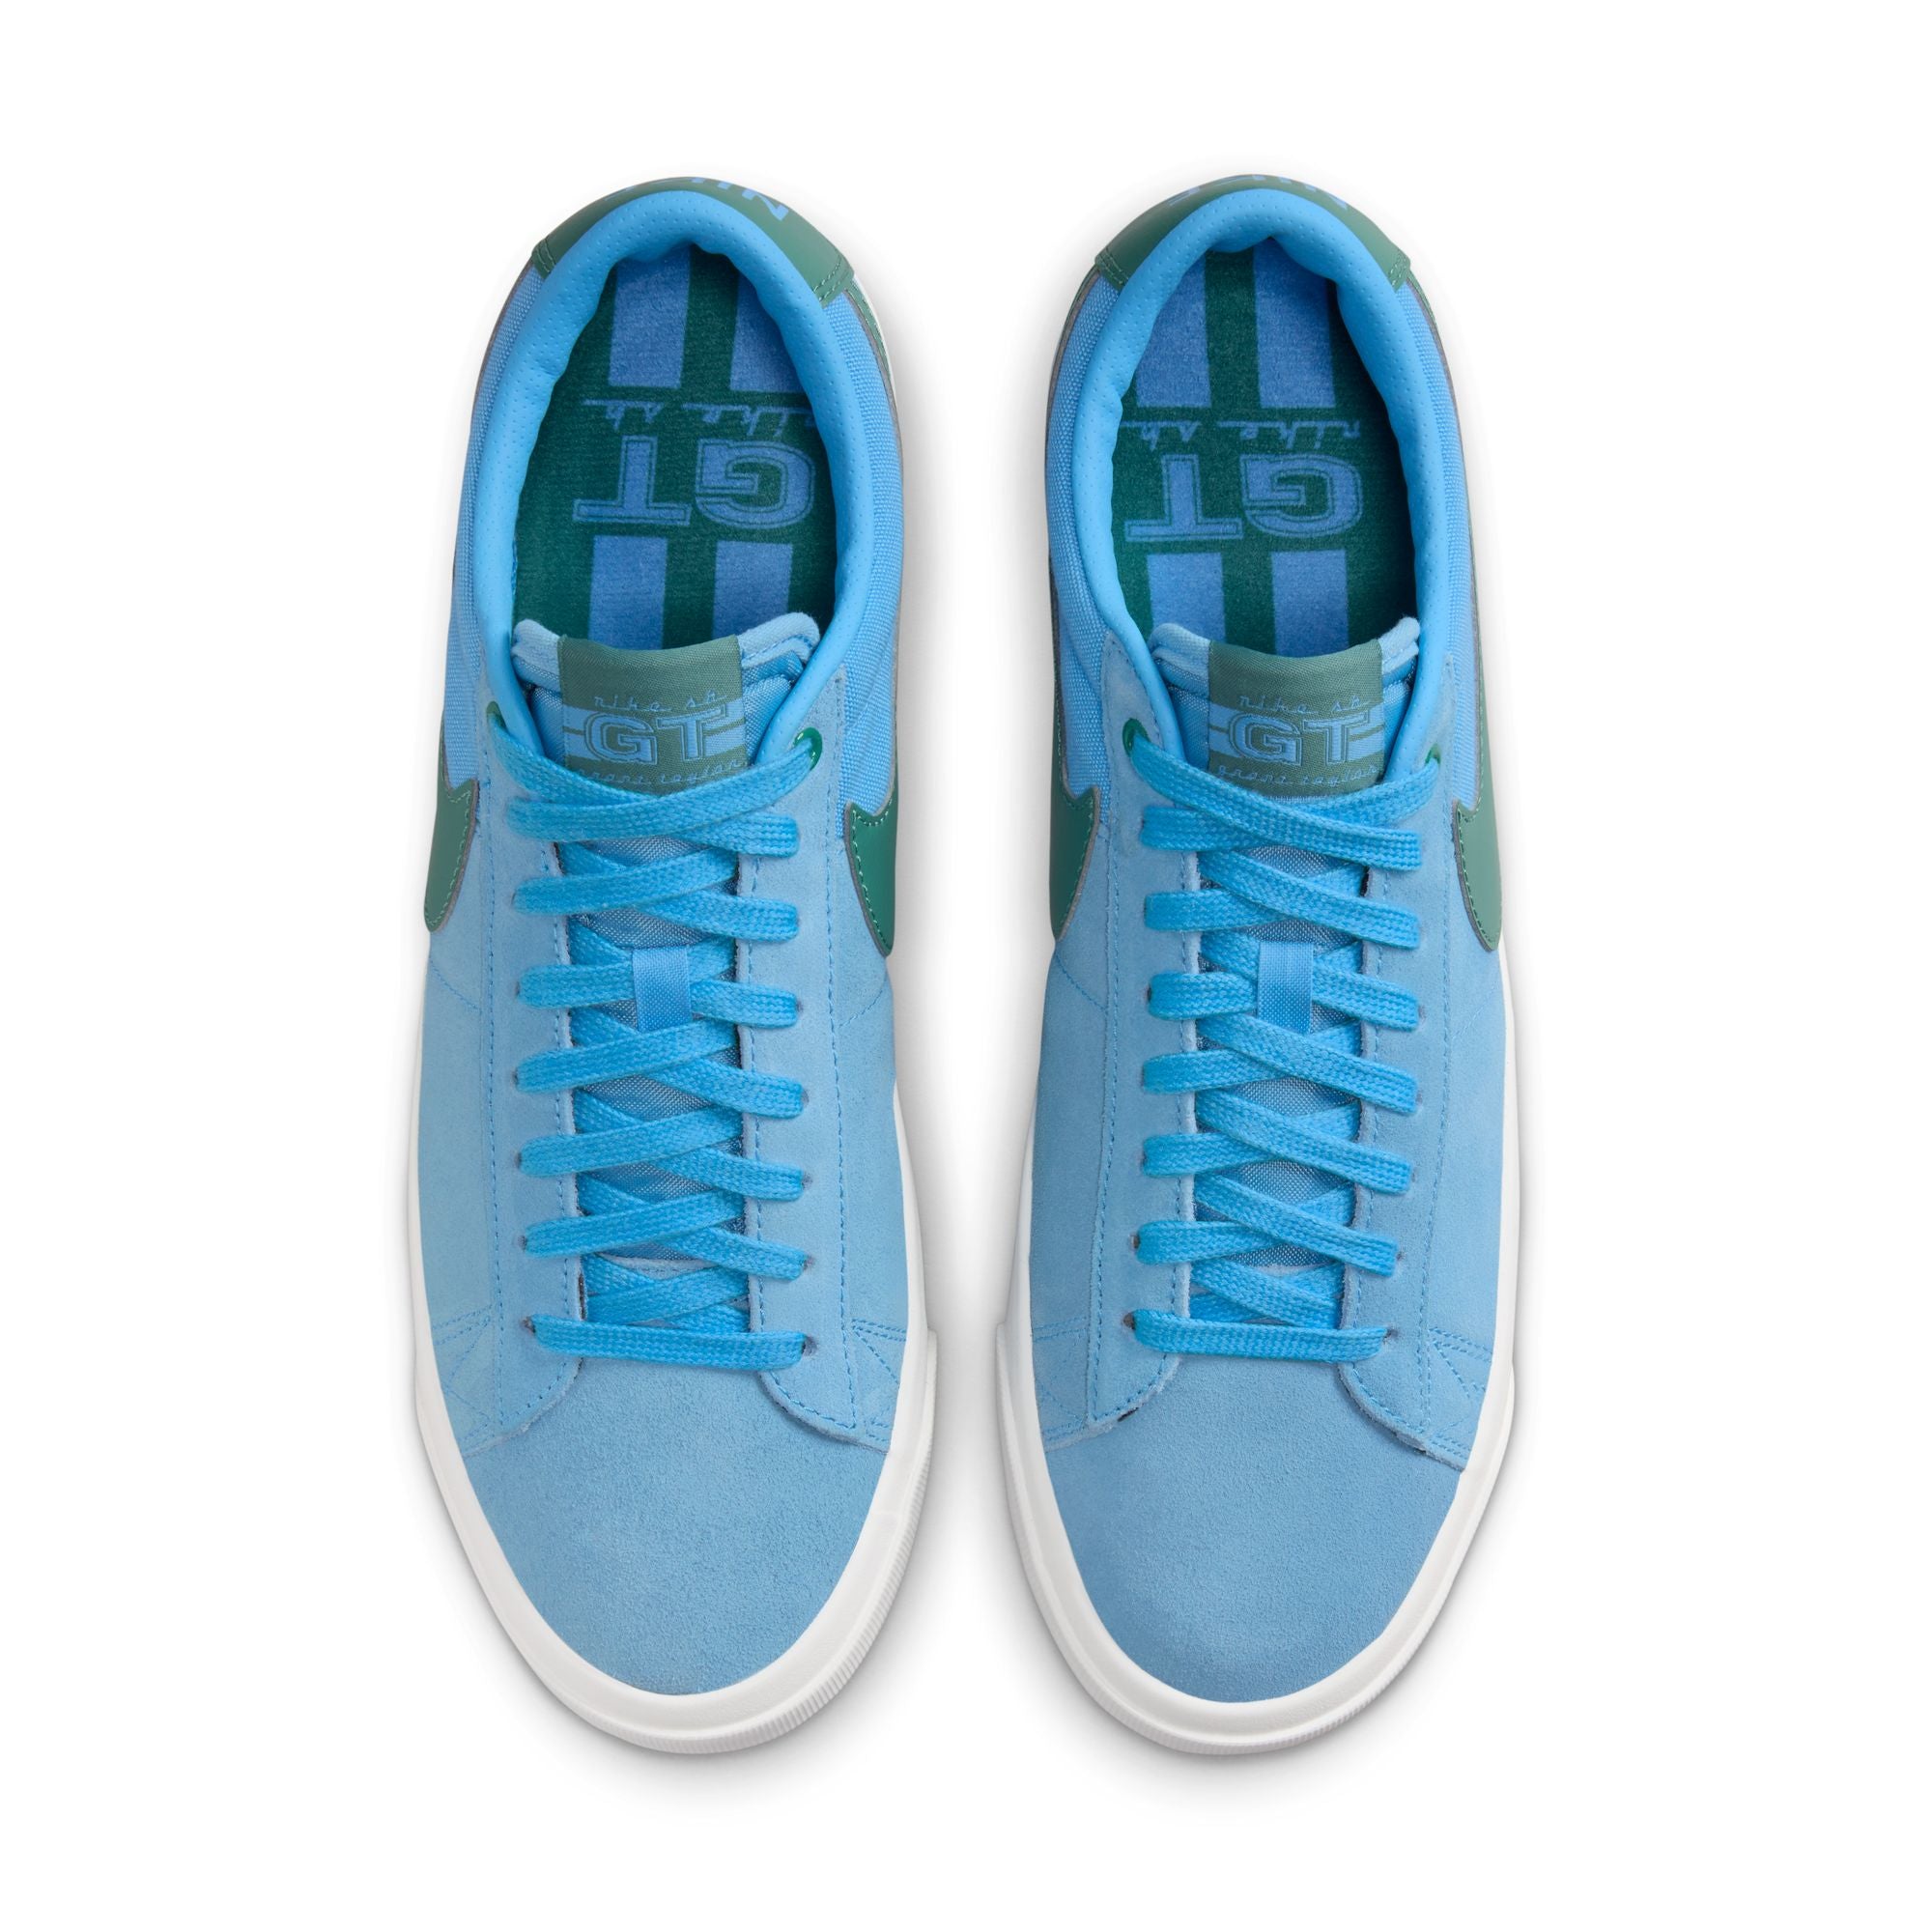 University blue nike sb blazer low top shoes with teal nike tick and white sole. Free uk shipping over £50